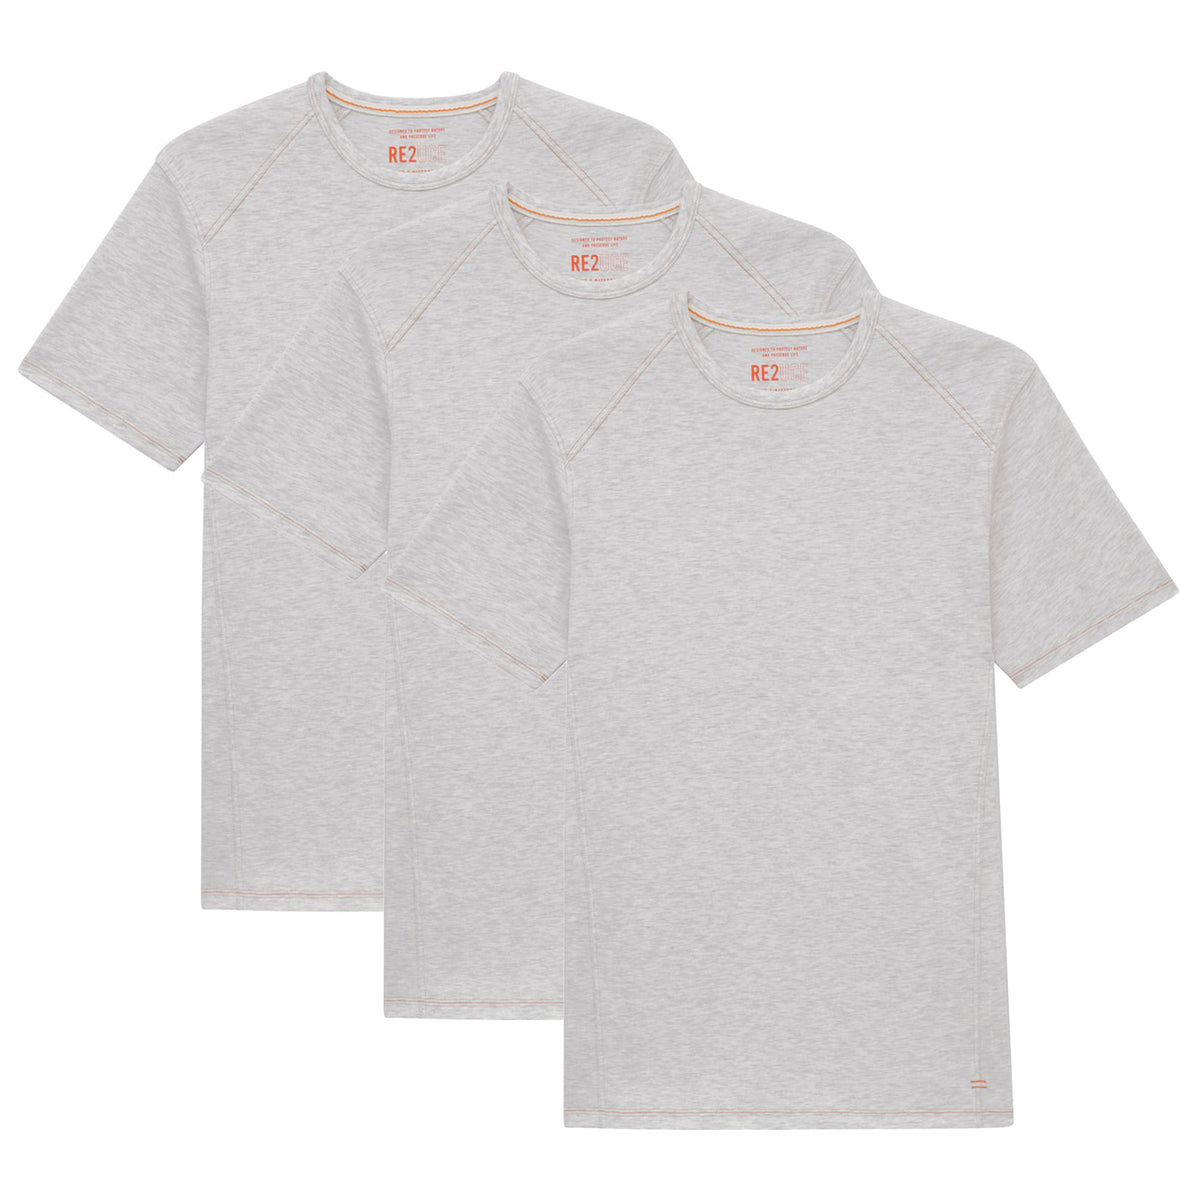 All Oatmeal Heather Organic Crew Neck 3 Pack